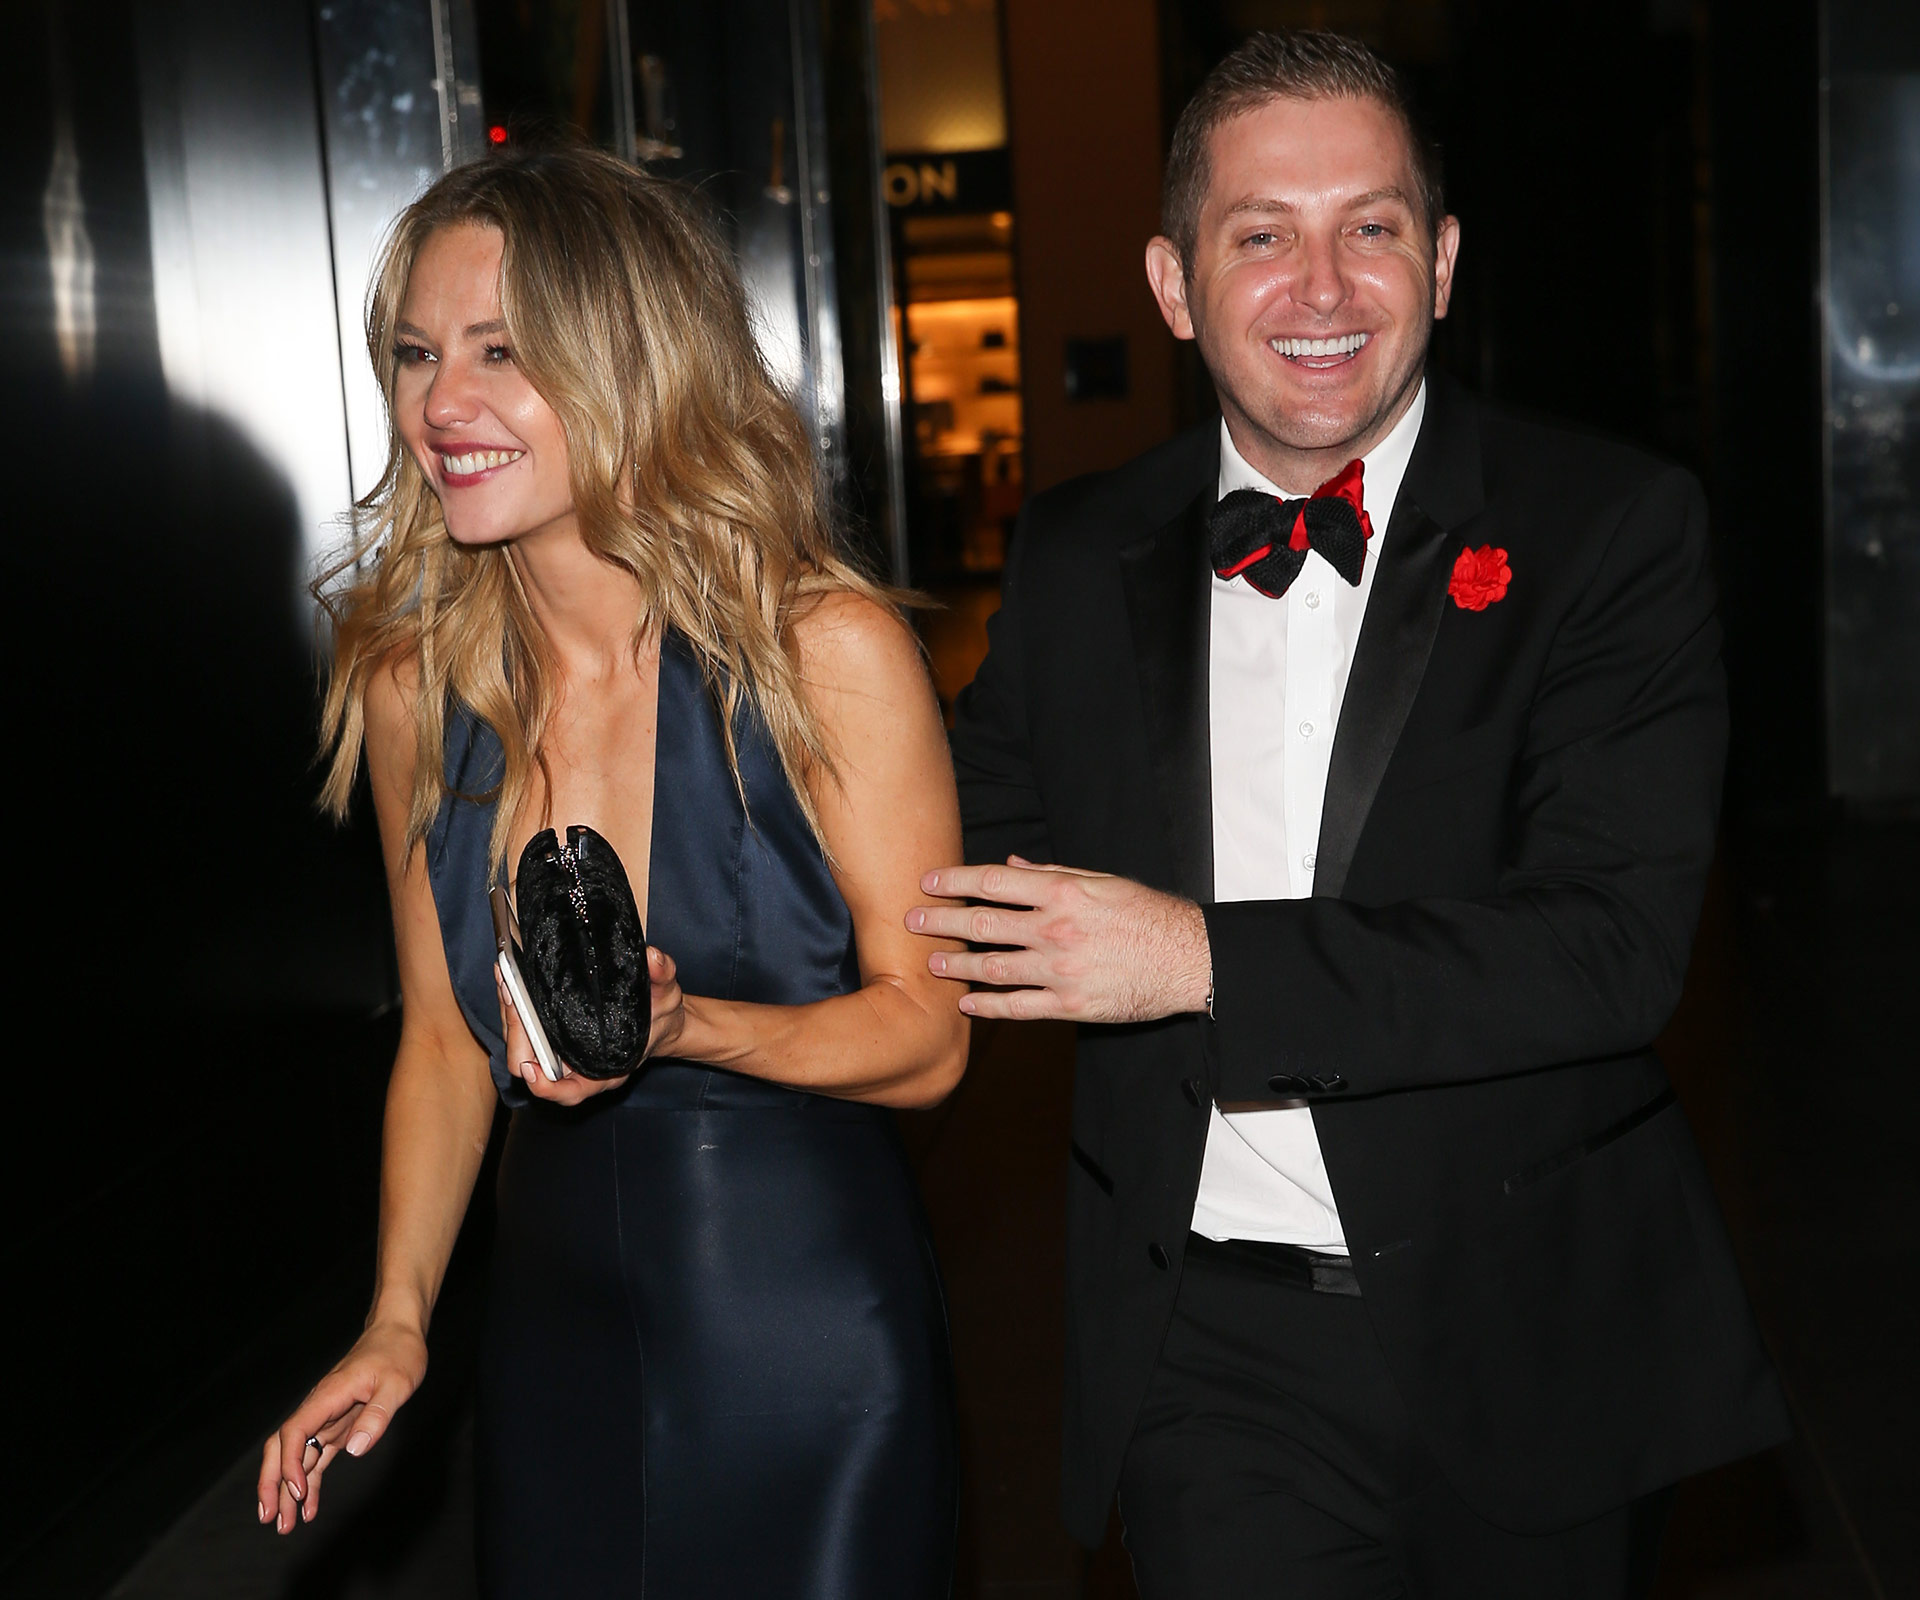 Sam Frost and John Caldwell